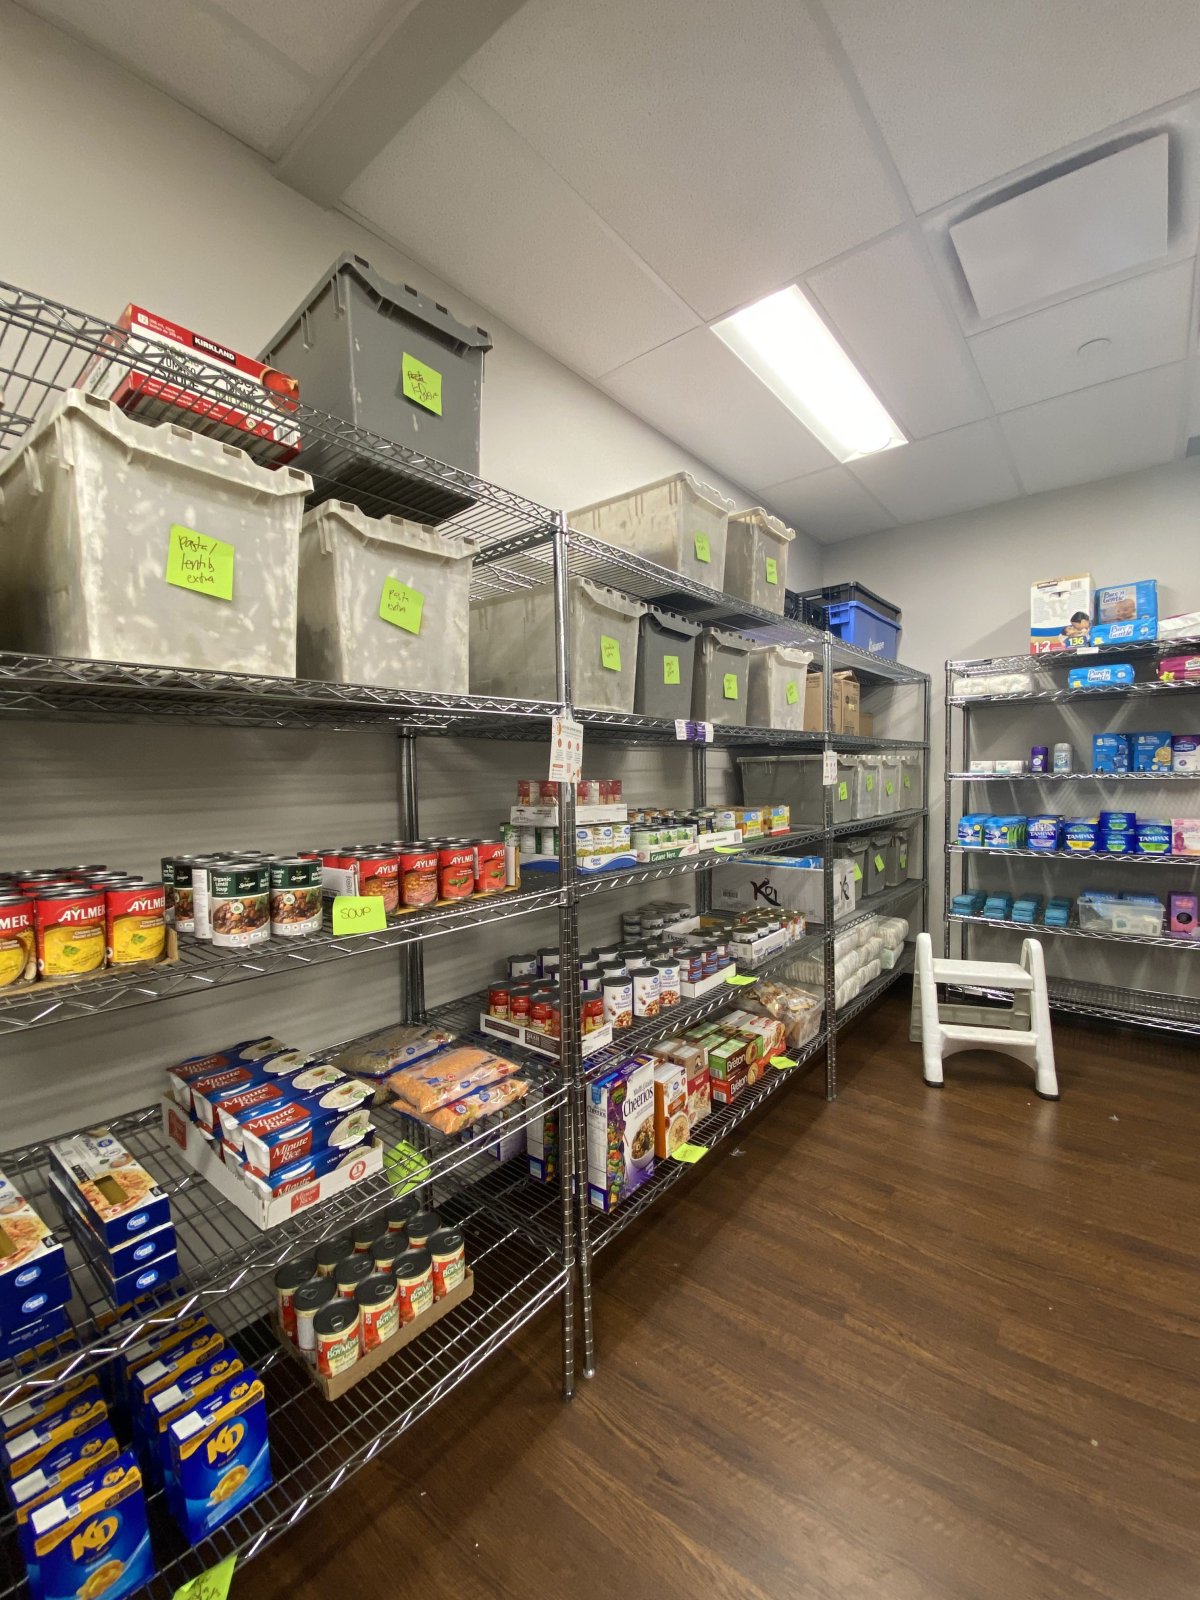 The food bank reported a more than 50 per cent increase in use between 2021 and 2022, with more than 1,000 students using the walk-in service last year.